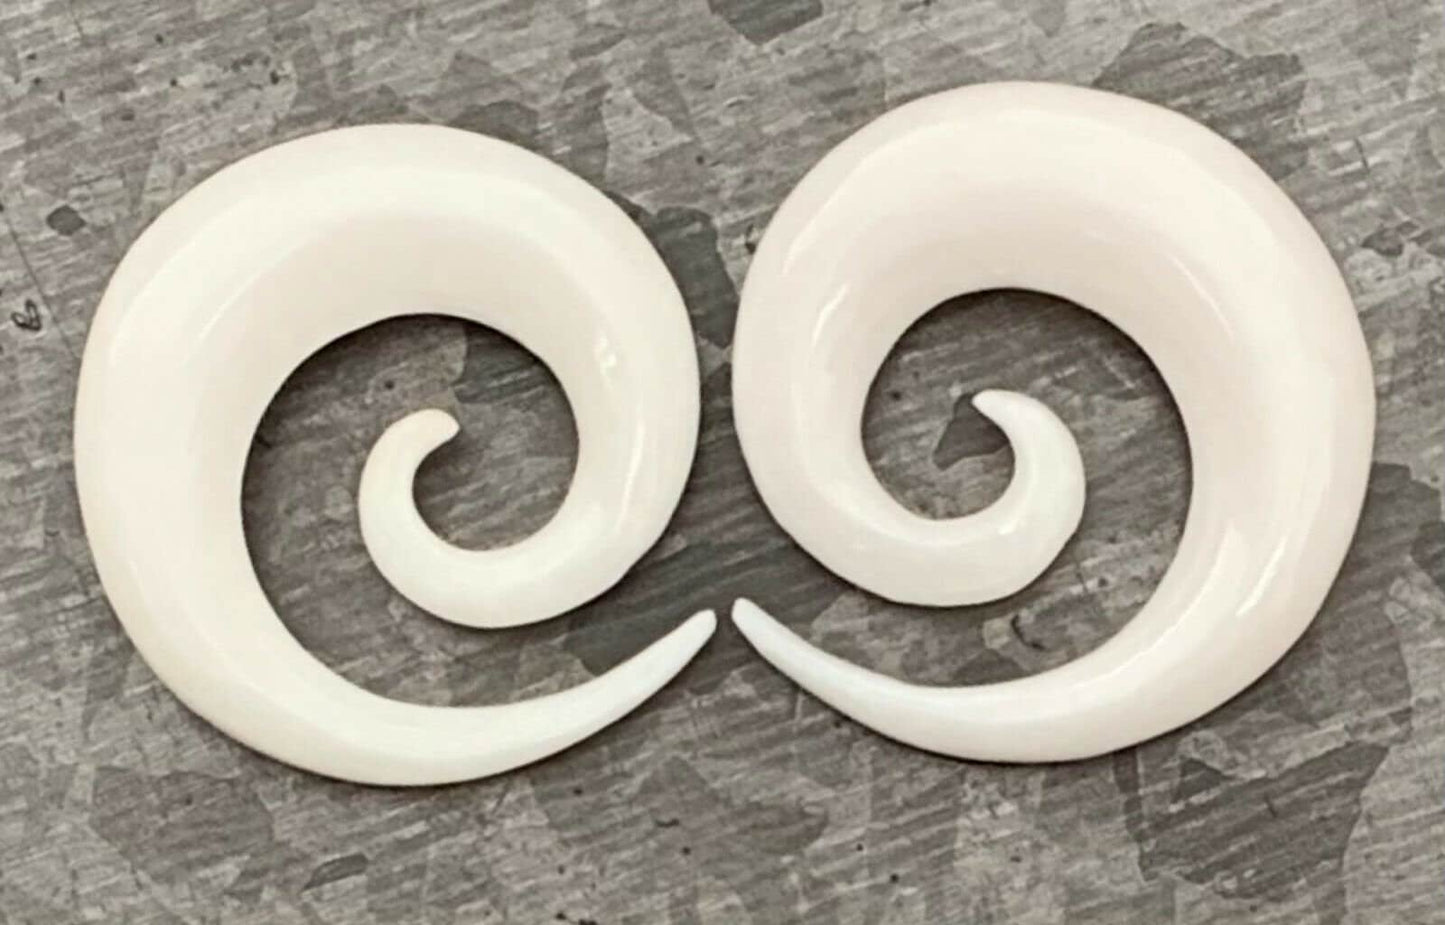 PAIR of Unique Organic Buffalo Bone Spiral Tapers/Plugs - Expanders - Gauges 8g (3mm) thru 00g (10mm) available!